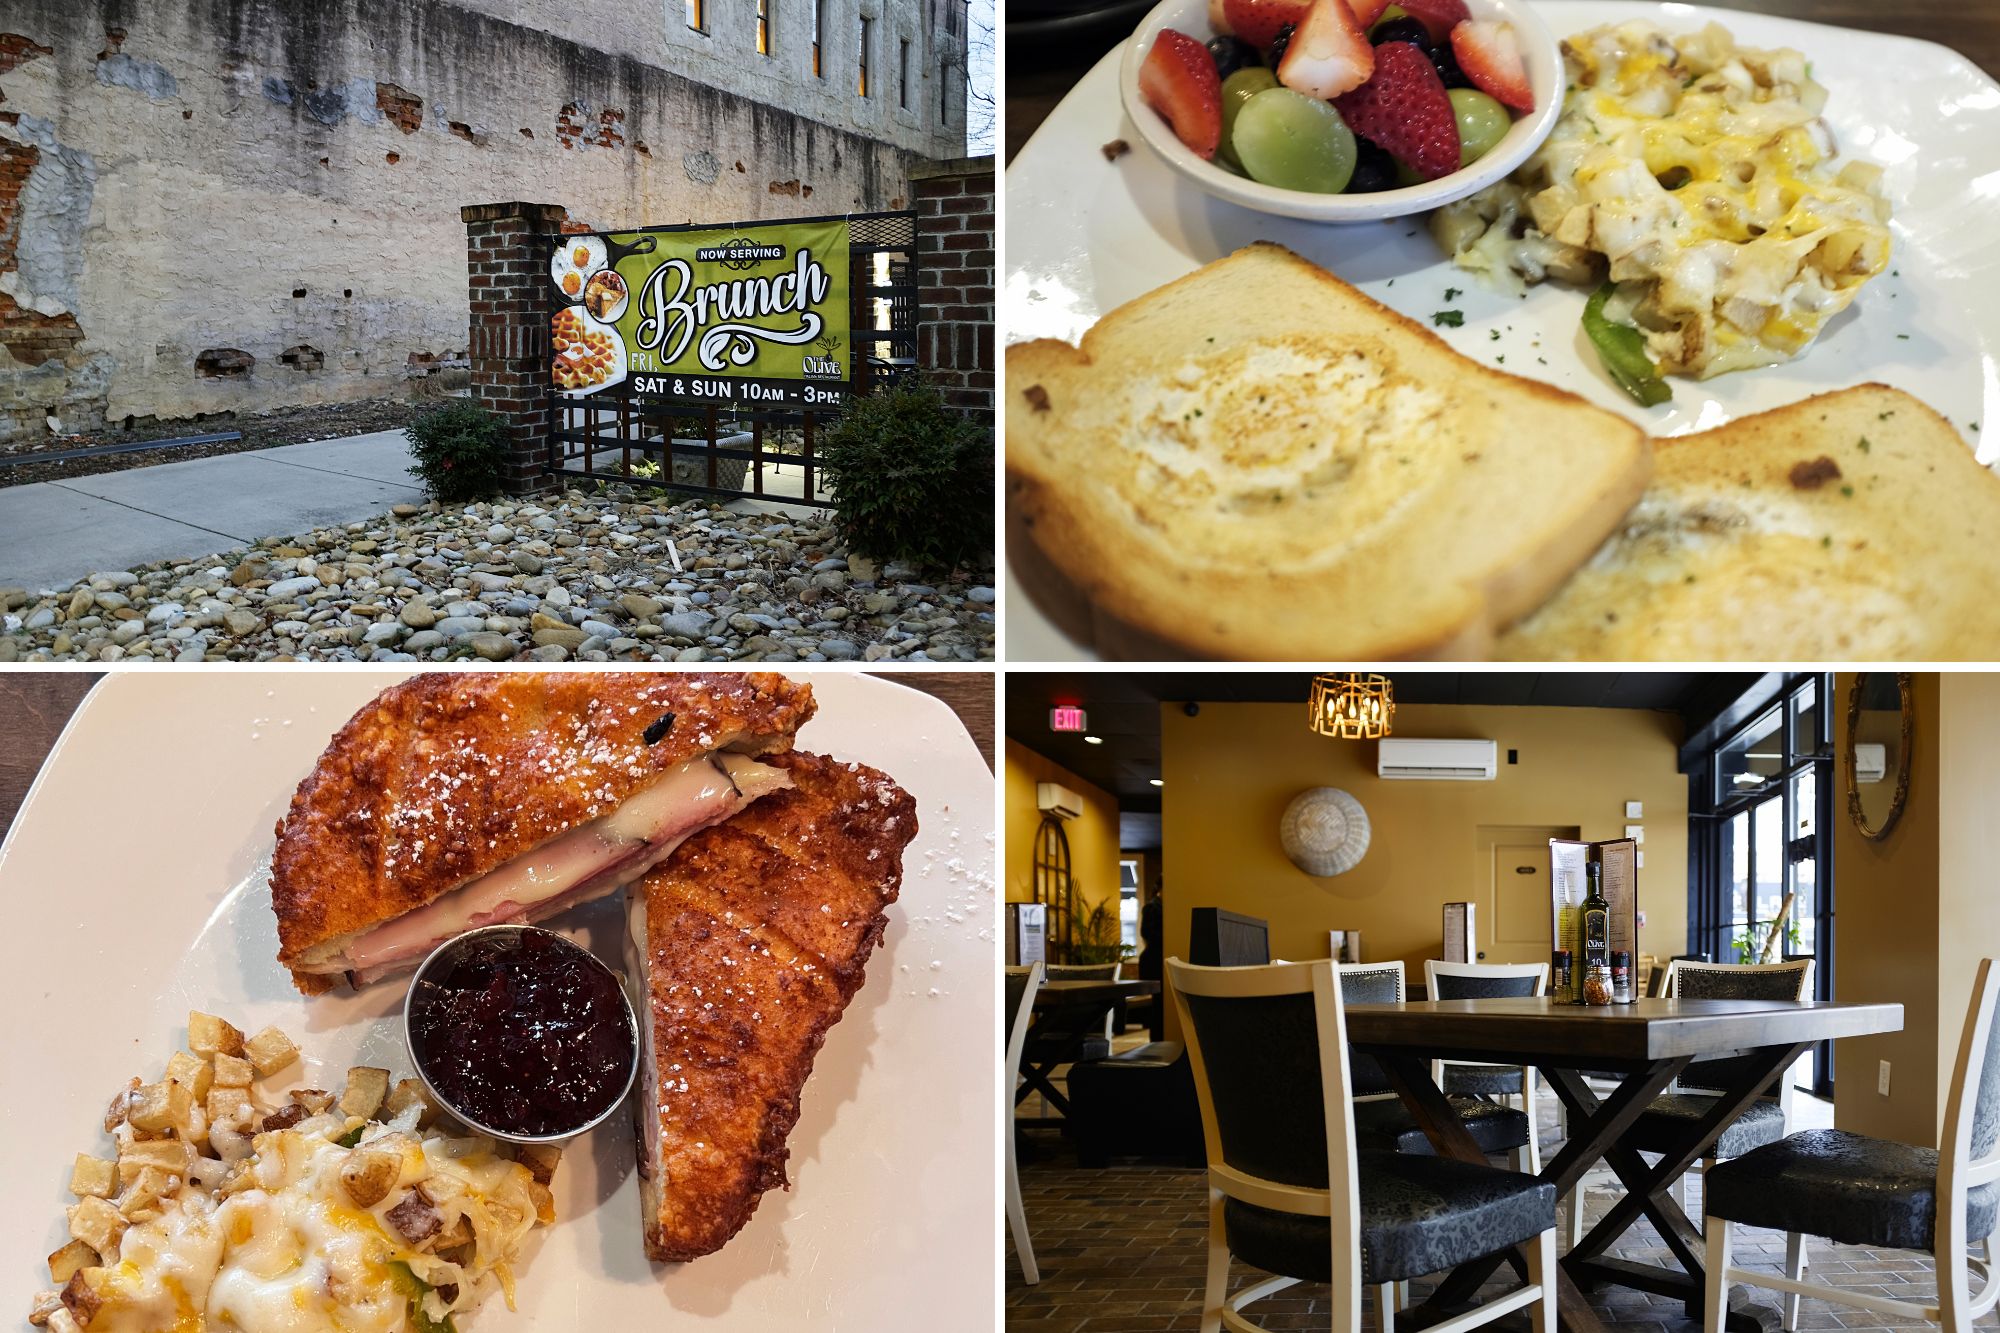 Collage of images from The Black Olive, including a sign advertising brunch, the Monte Cristo, eggs in a hole, and tables in the restaurant